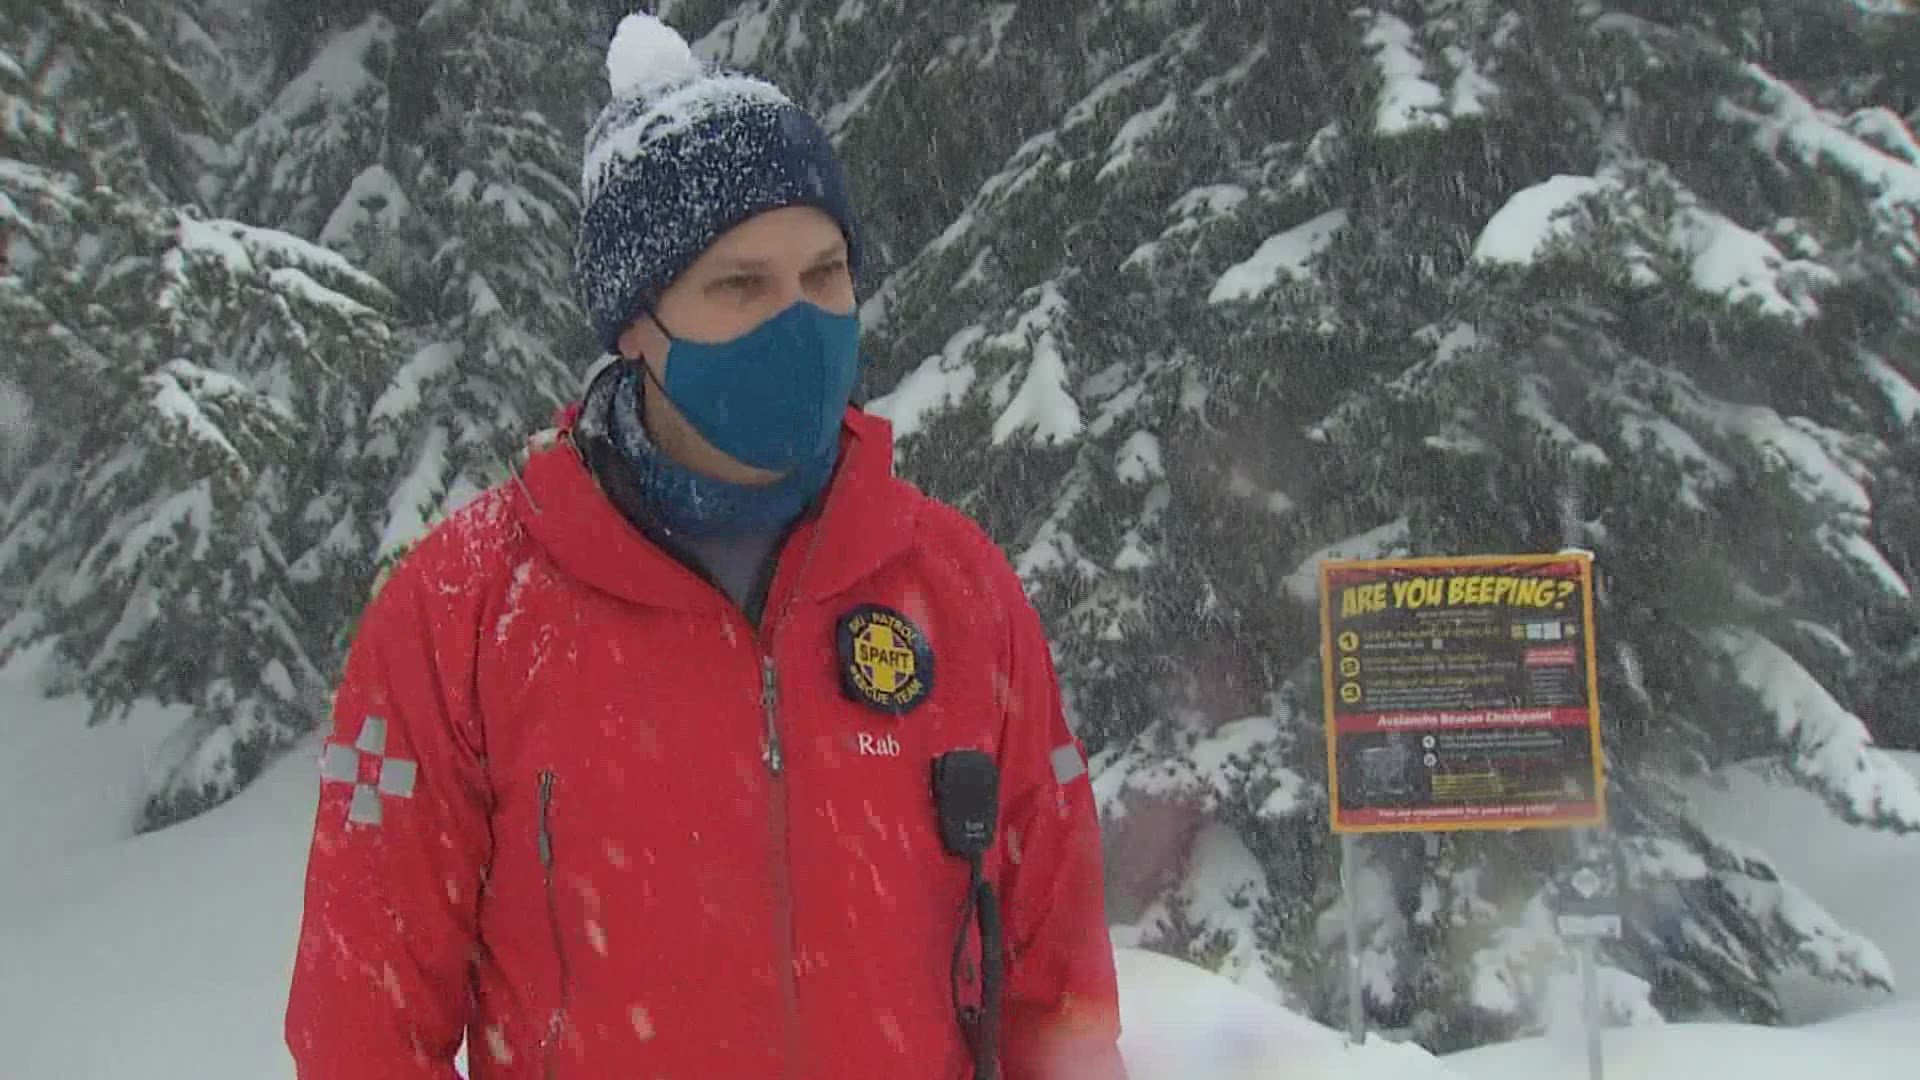 A volunteer ski patroller started a project to help save lives in the Cascade mountains.